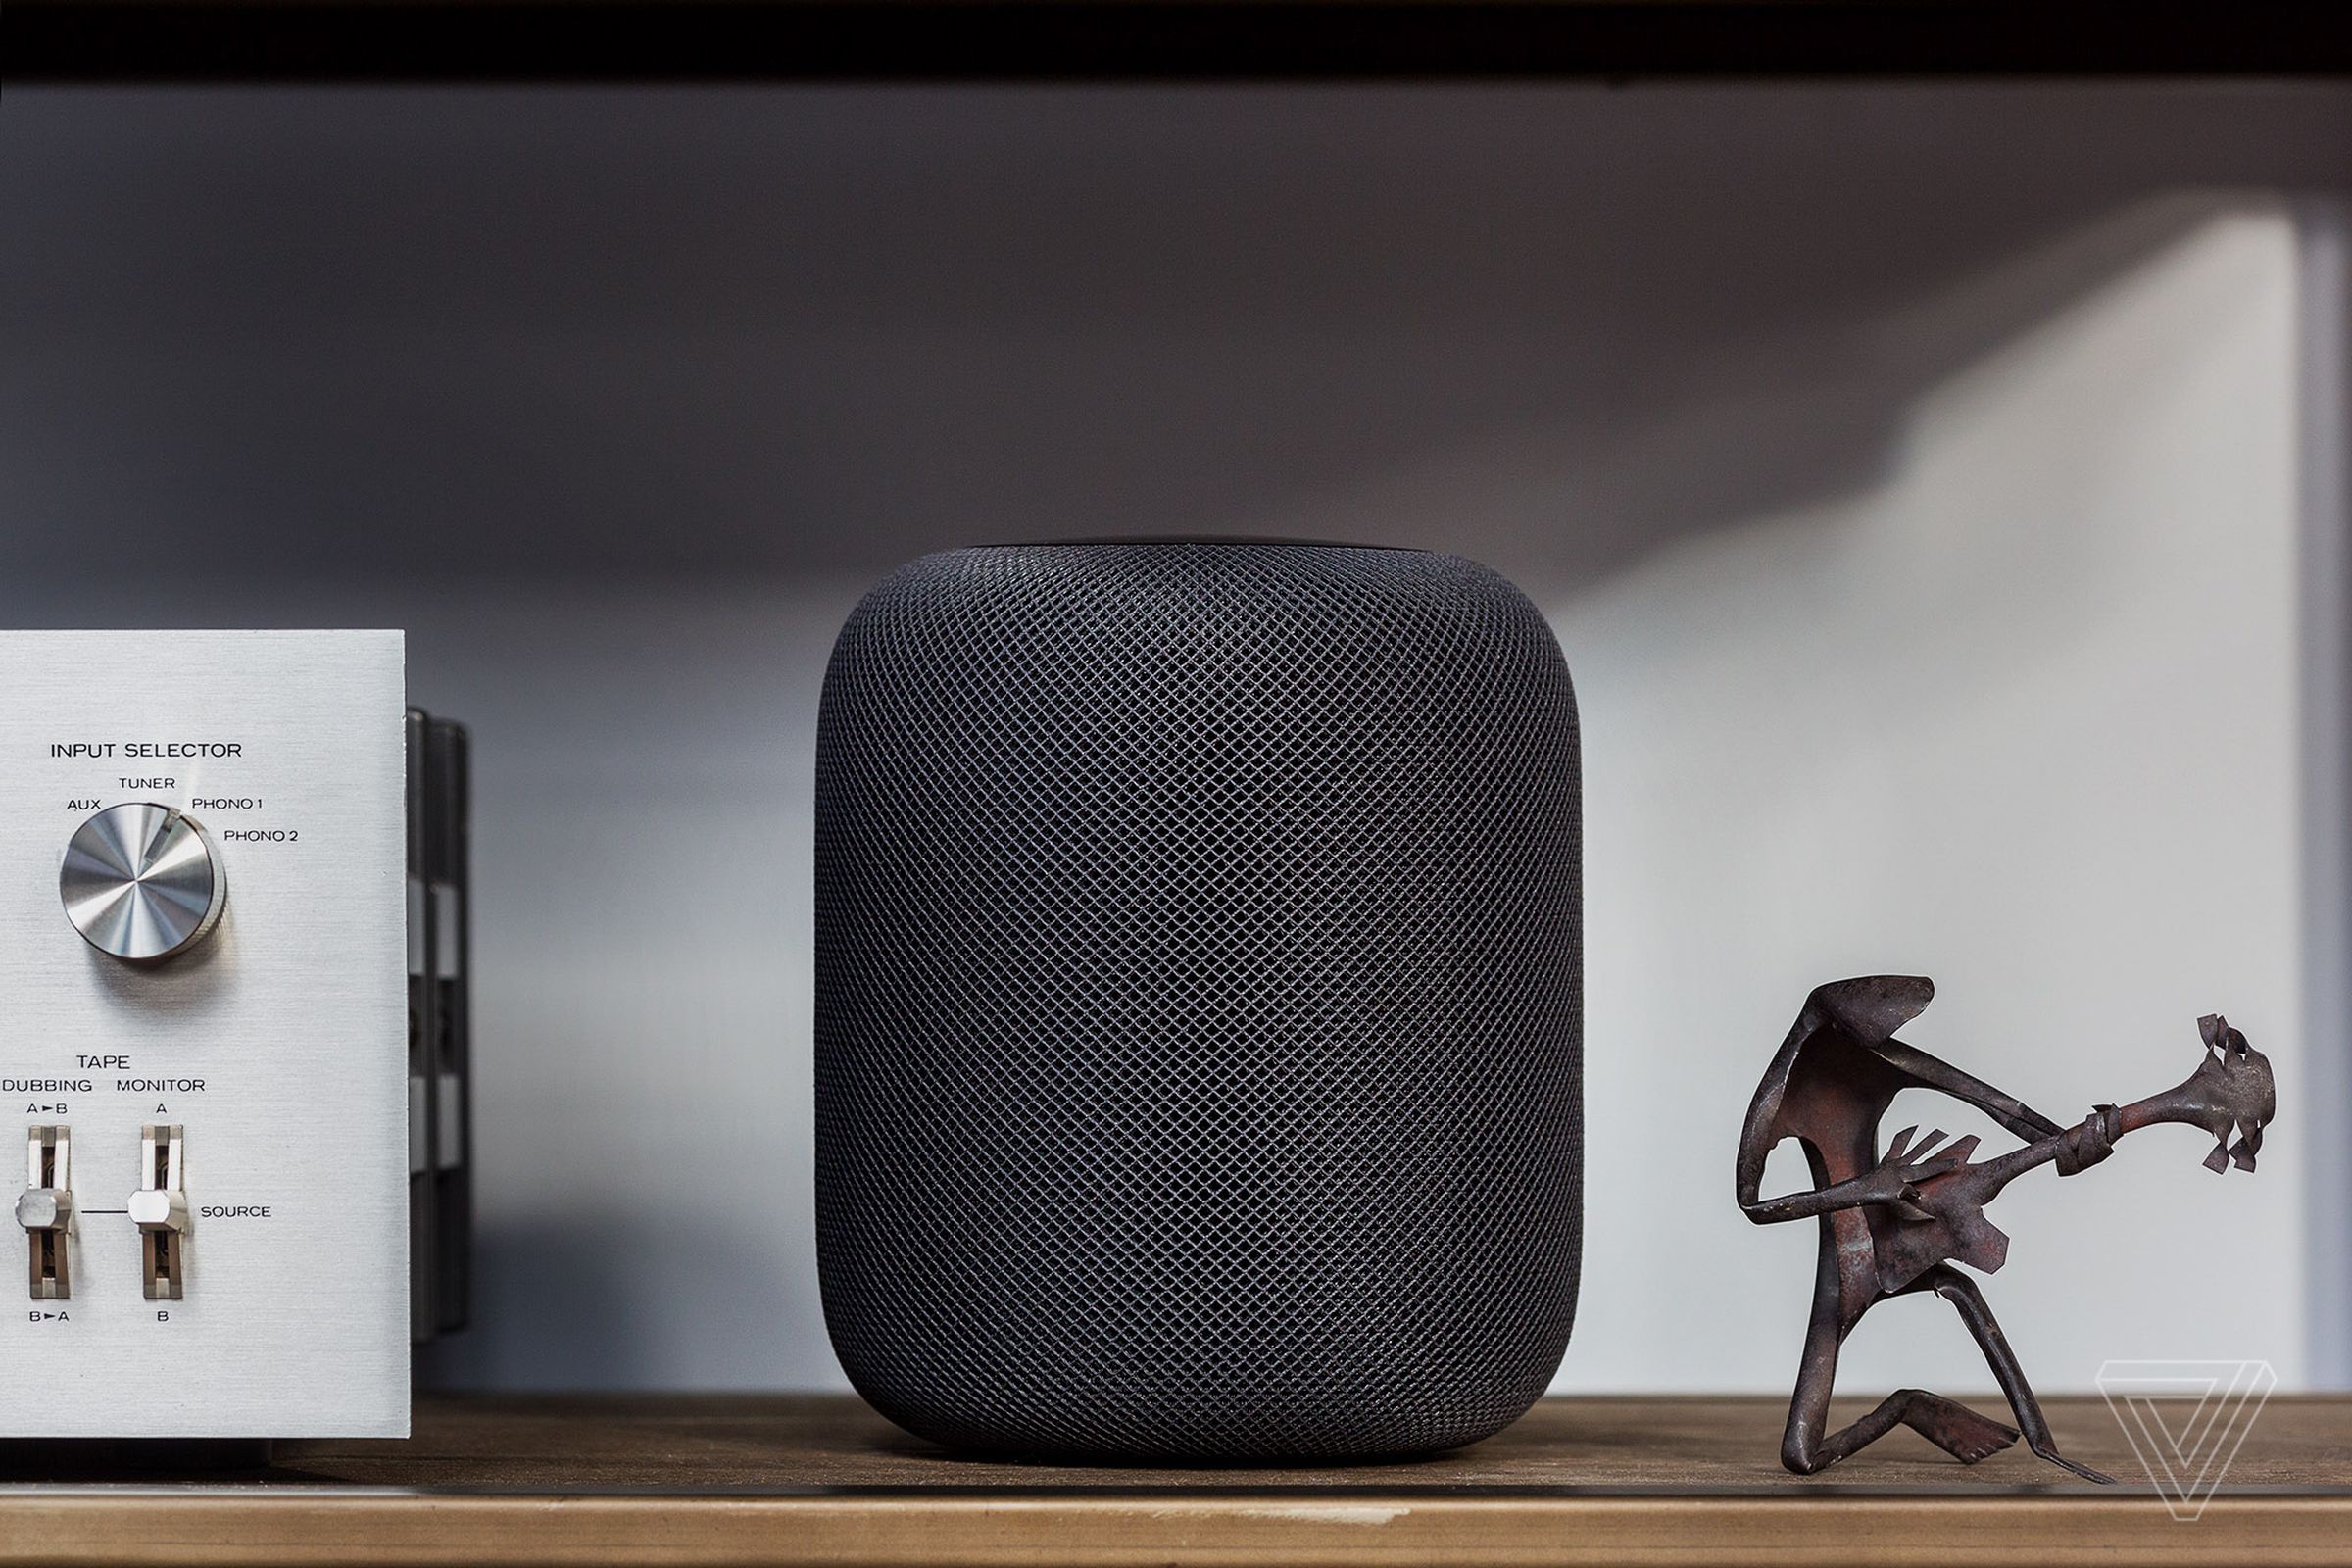 Dolby Atmos will be supported by the pre-existing HomePod, but not the HomePod mini.